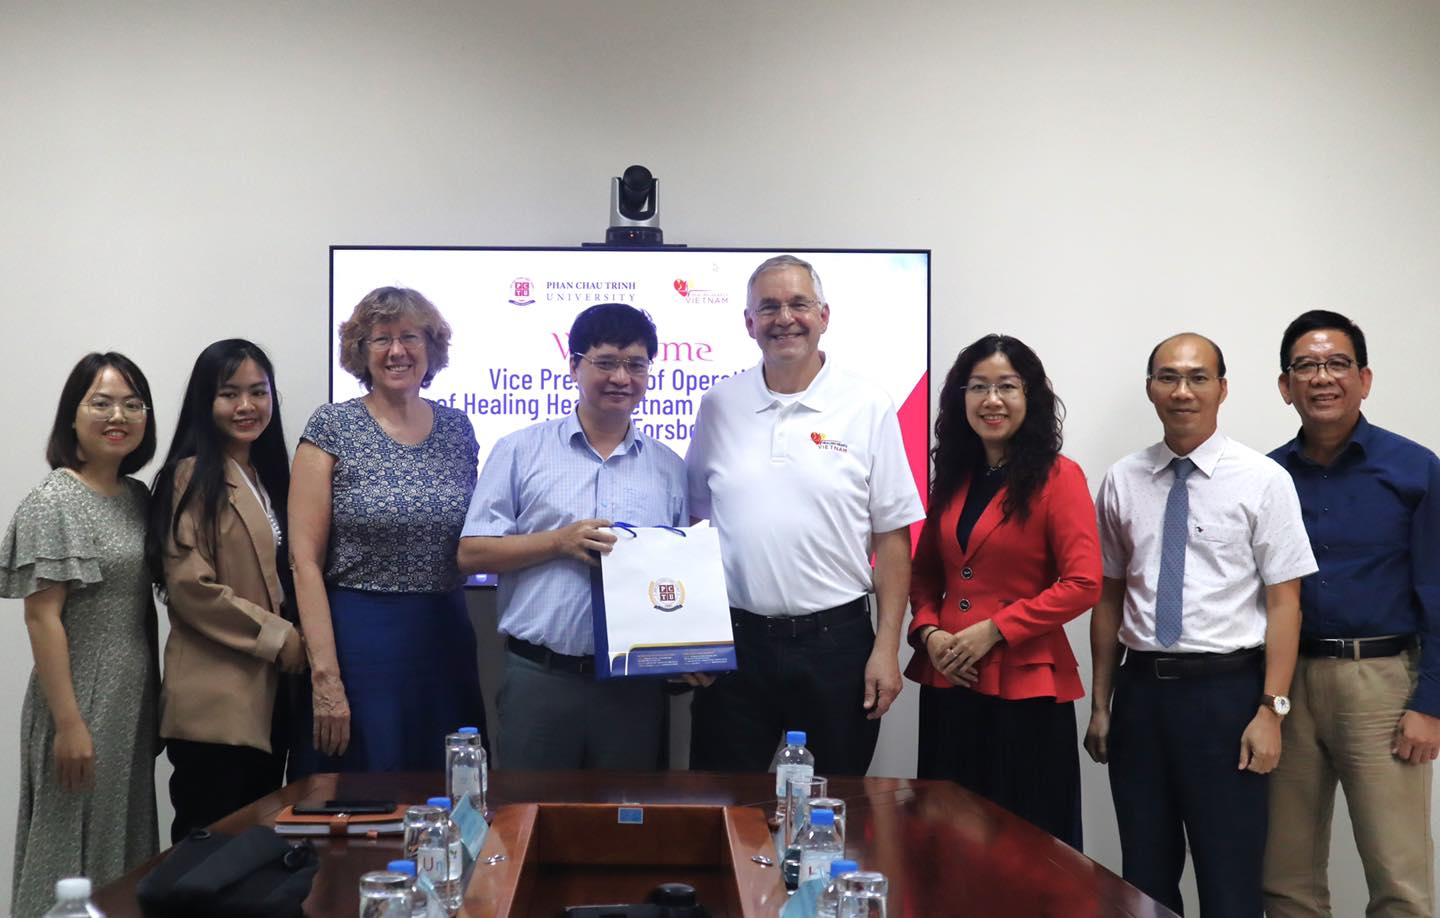 MR. THOMAS FORBERG - VICE CHAIRMAN OF HEALING HEARTS VIETNAM ORGANIZATION VISITS AND COLLABORATES WITH PHAN CHAU TRINH UNIVERSITY AND INSTITUTE